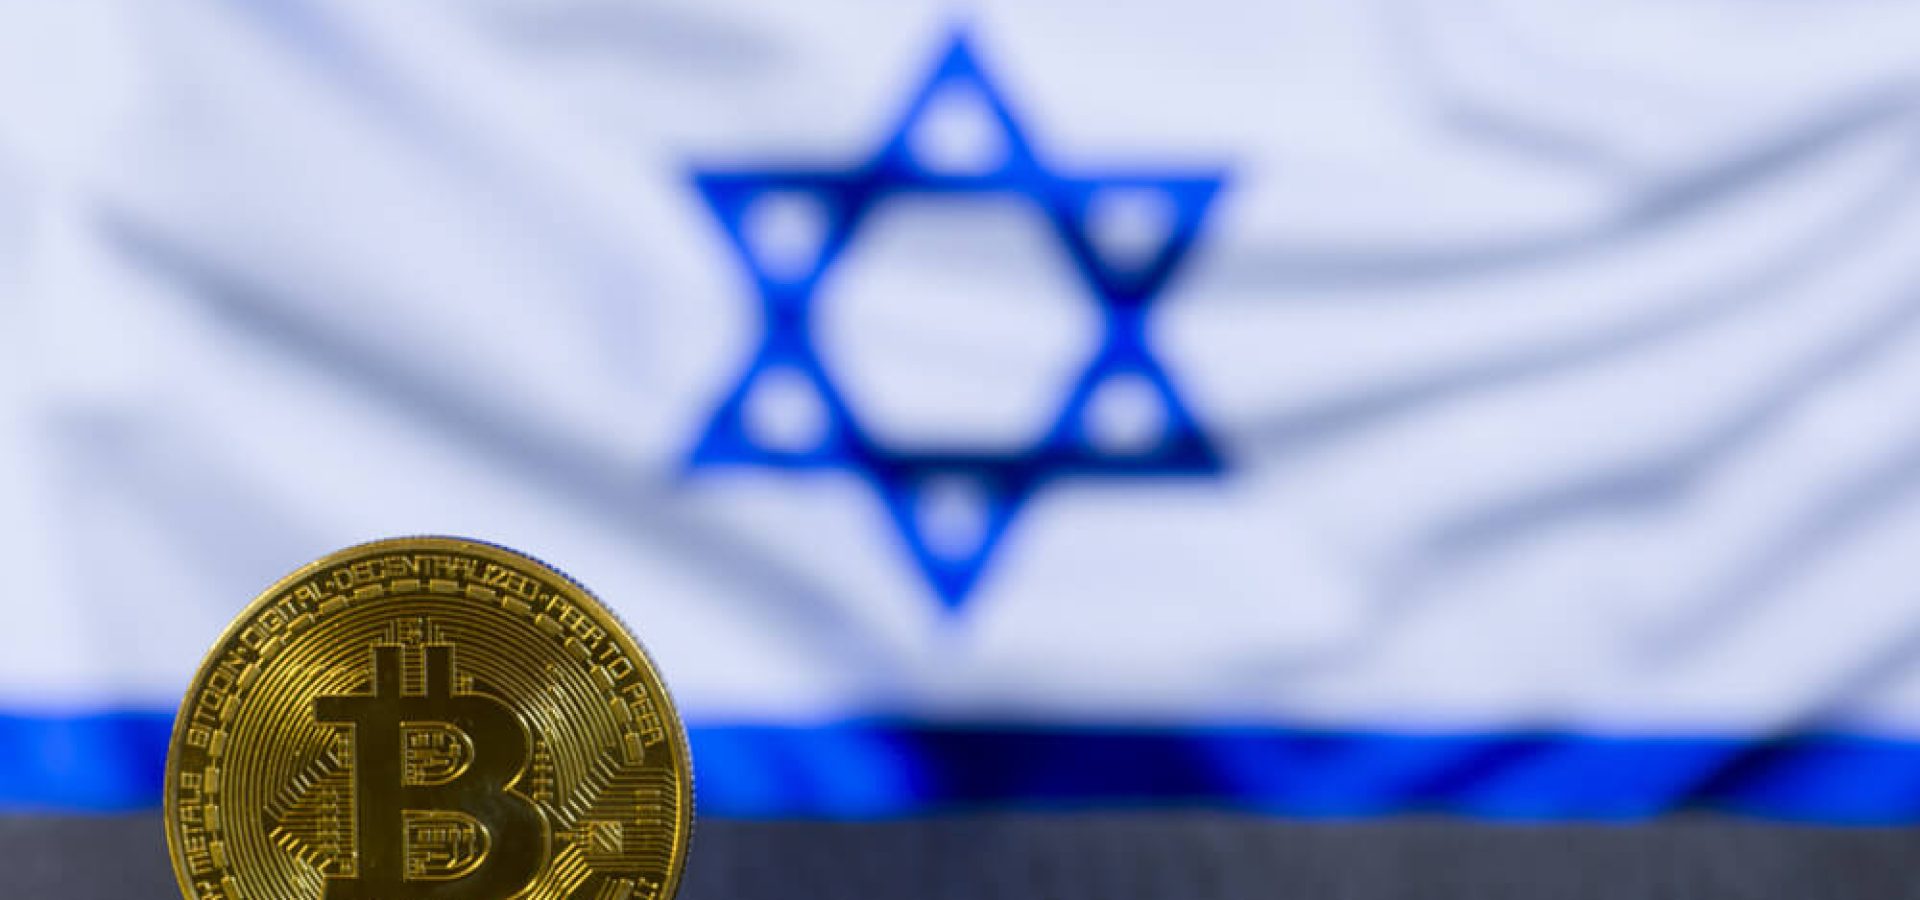 Digital Coins: Bitcoin golden coin with Israel flag in the background